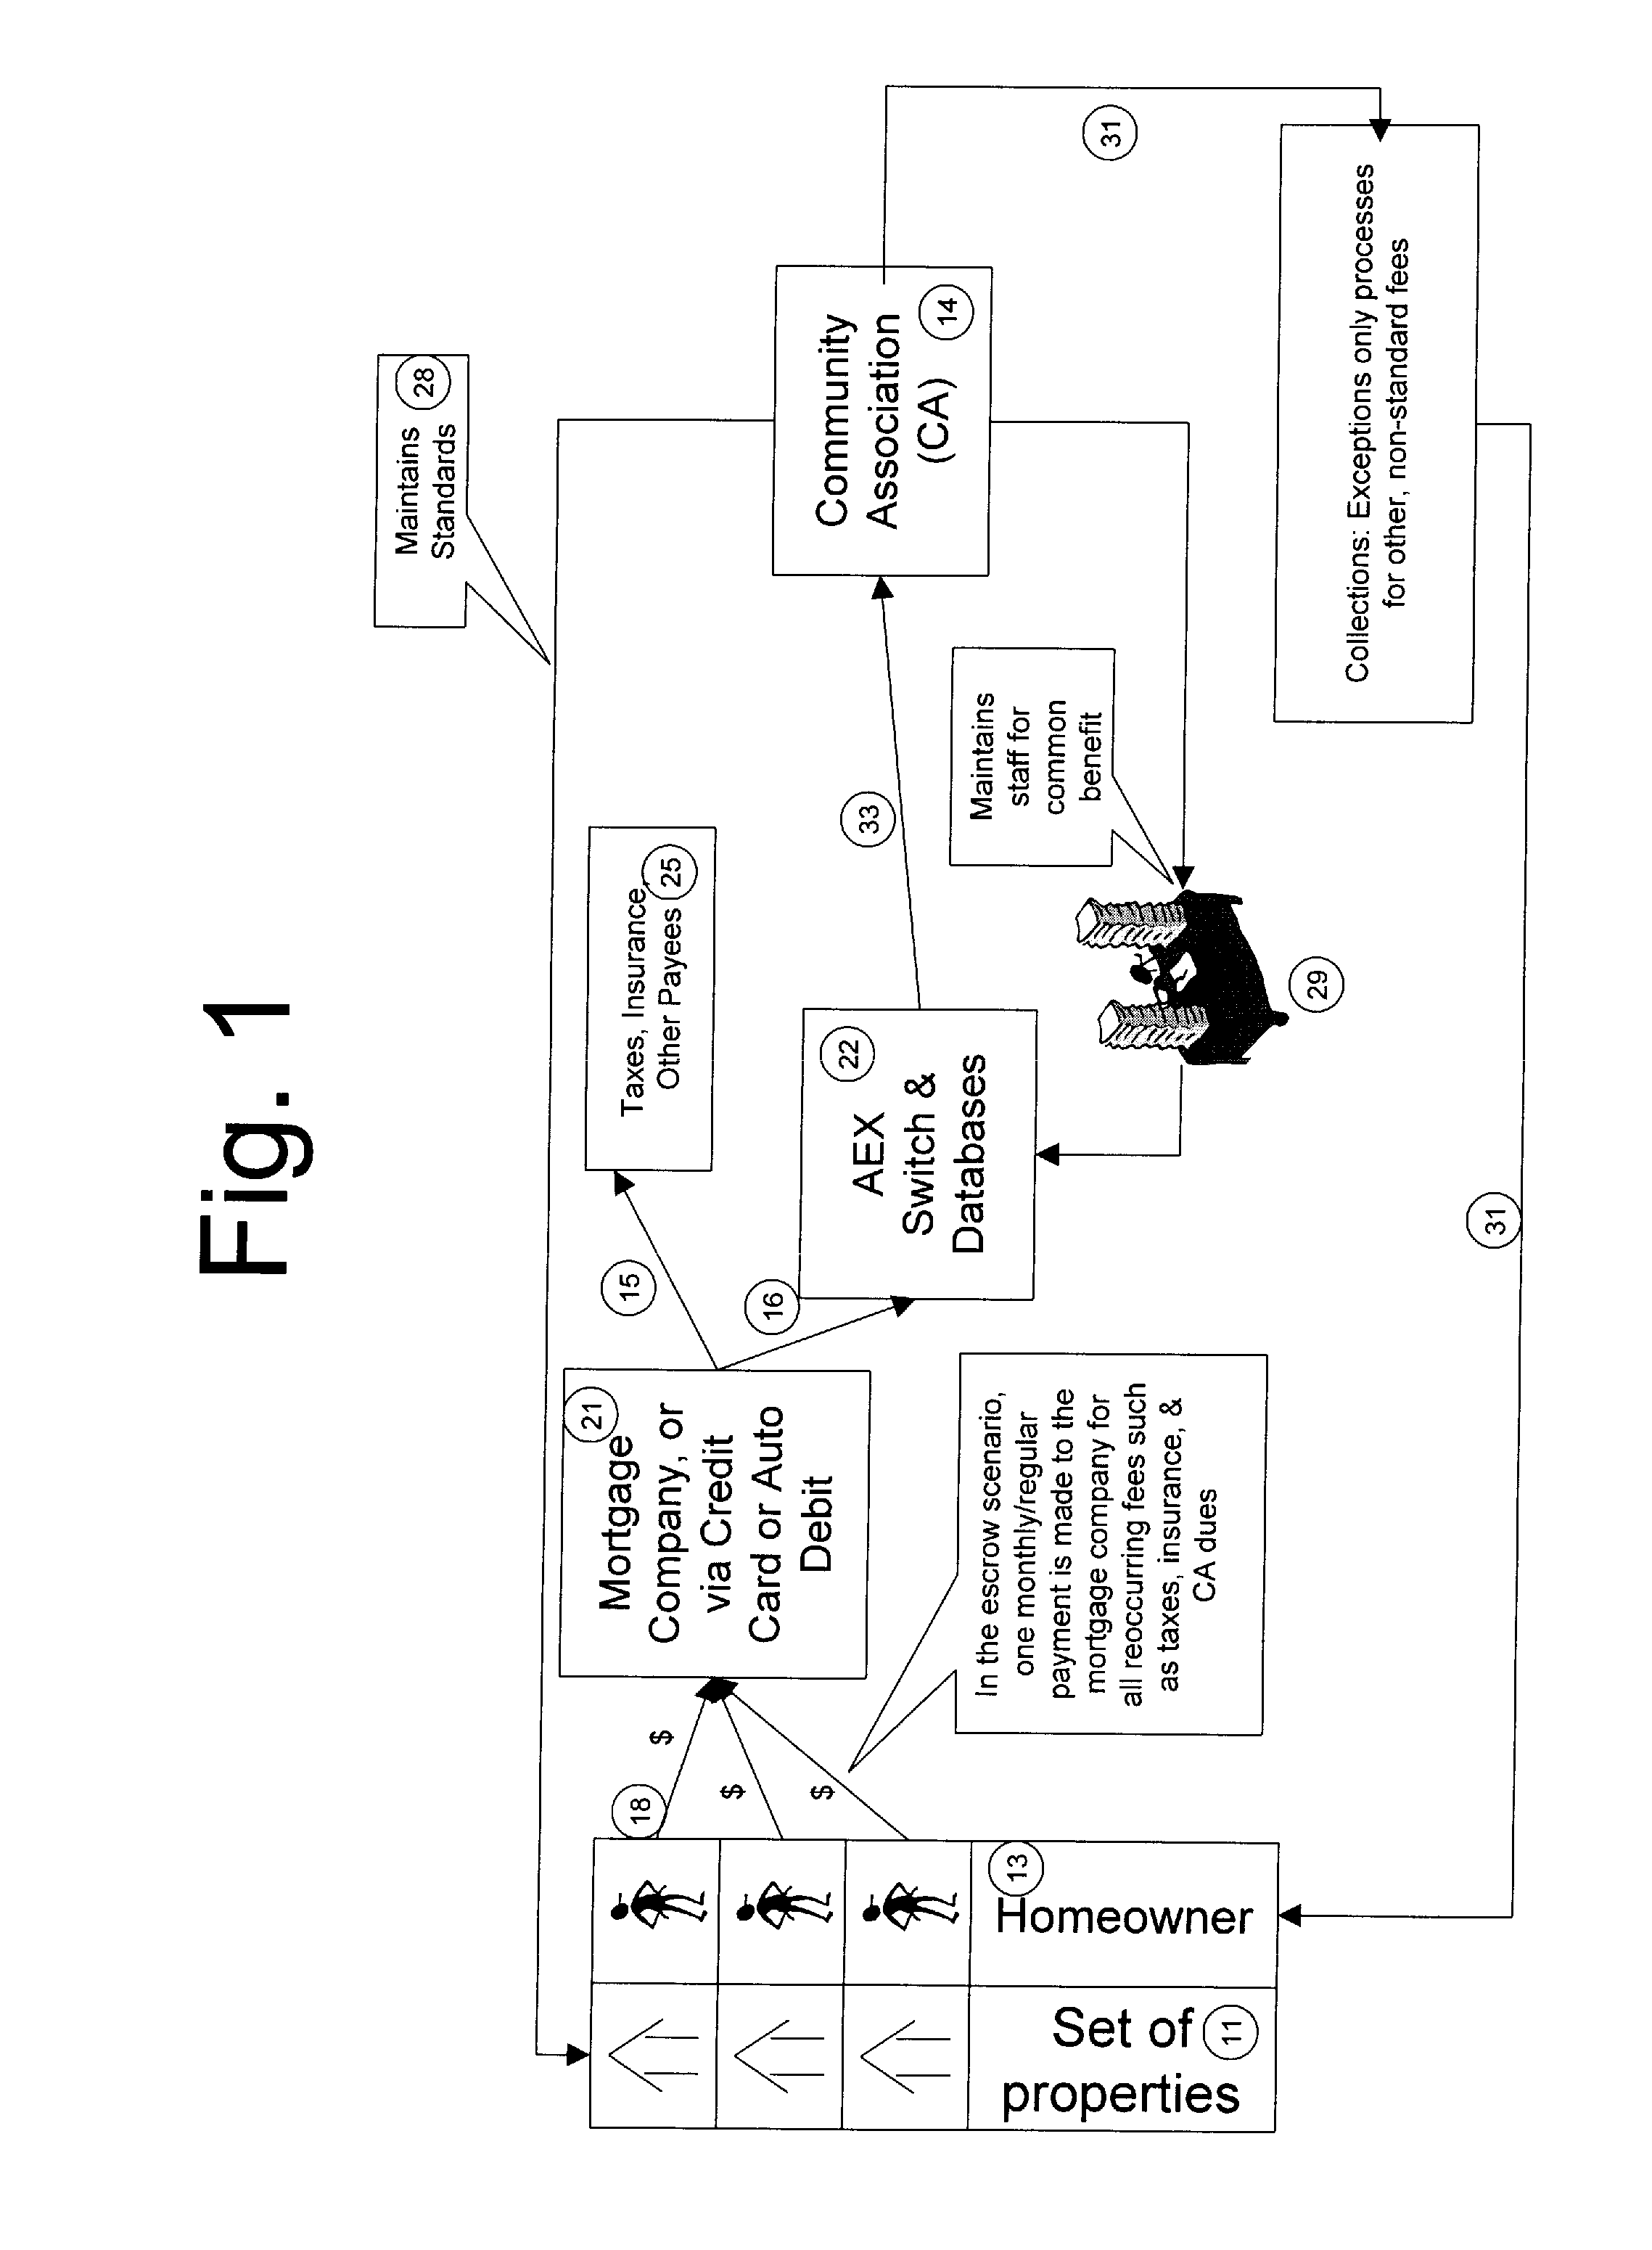 Methods, apparatus and products relating to payment of homeowner community assocation fees